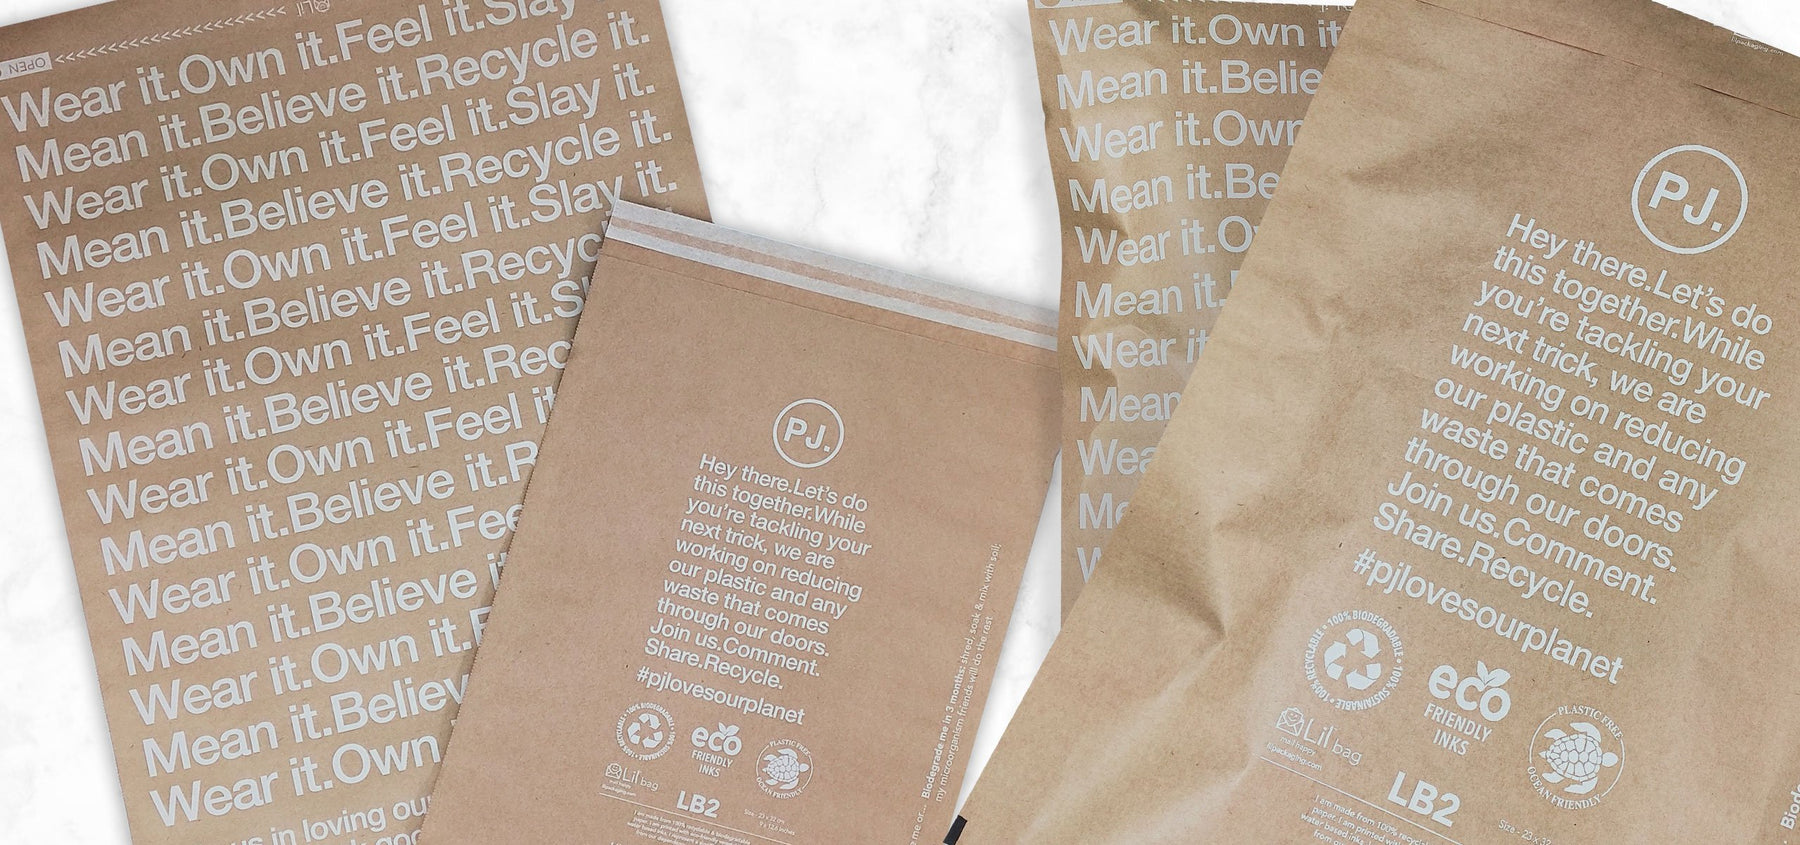 Pole Junkie - How they Boosted Customer Feedback with Eco Packaging